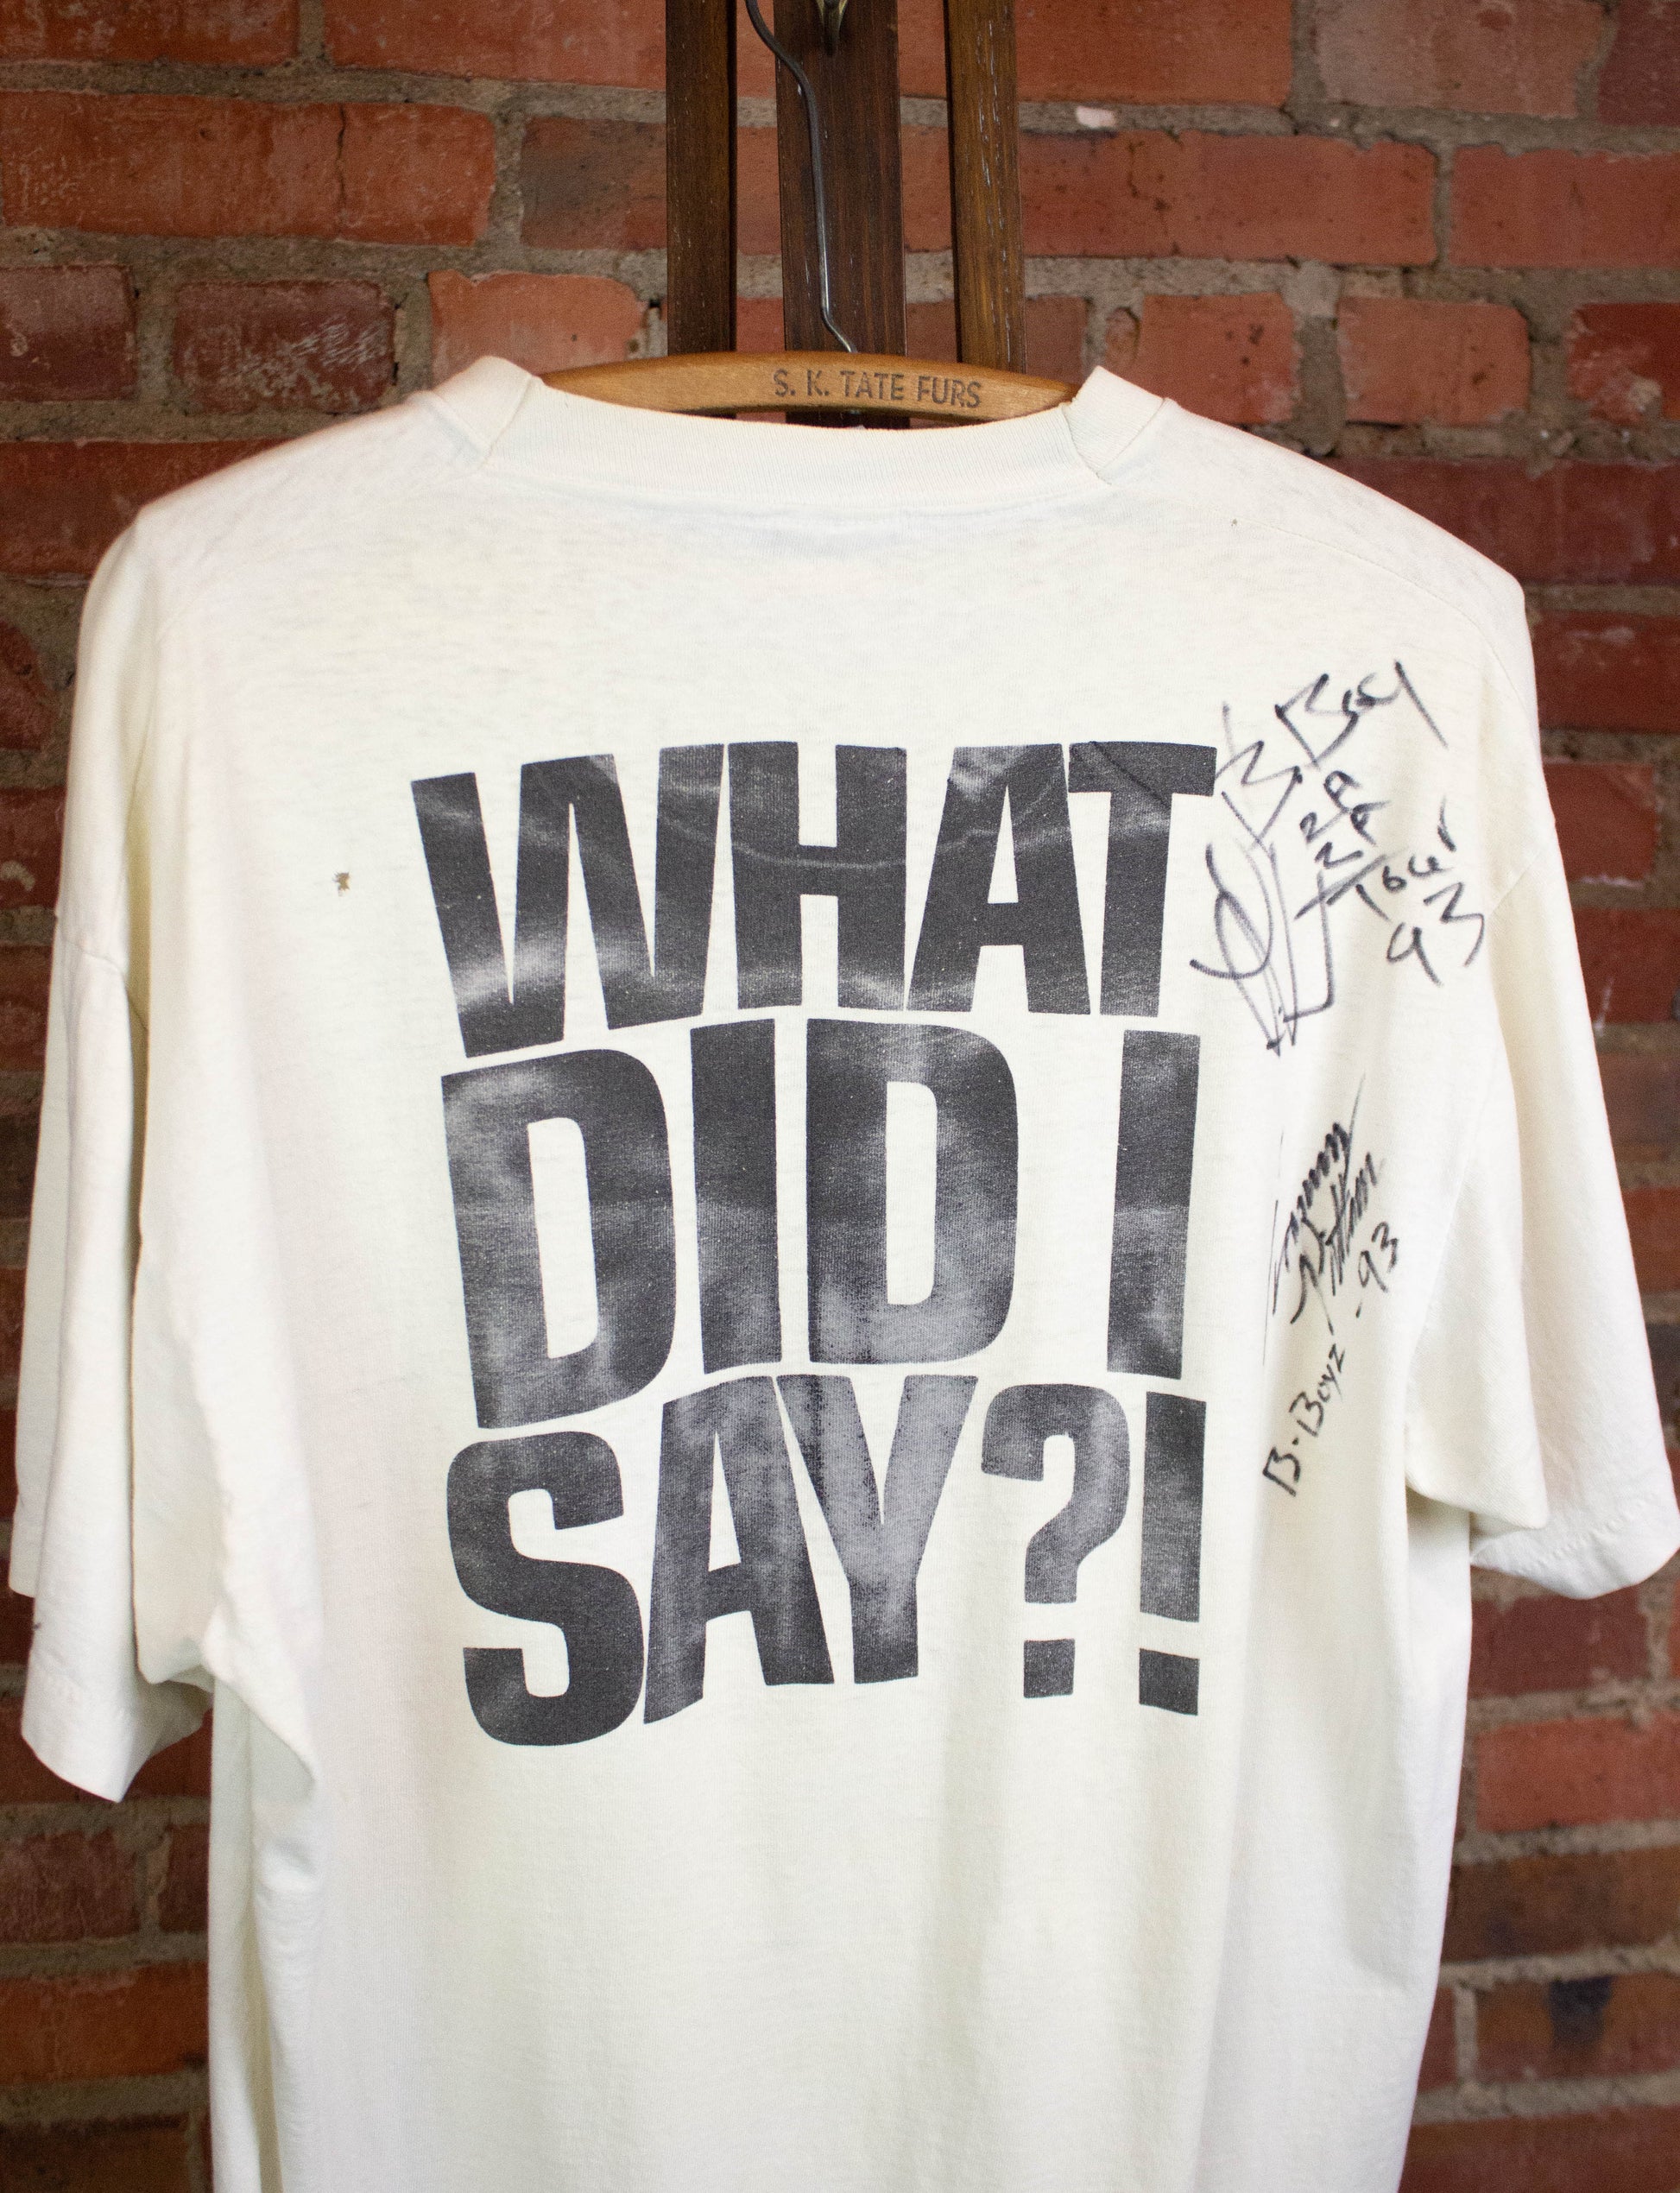 Vintage Bullet Boys 1989 What Did I Say?! Signed Concert T Shirt White XL